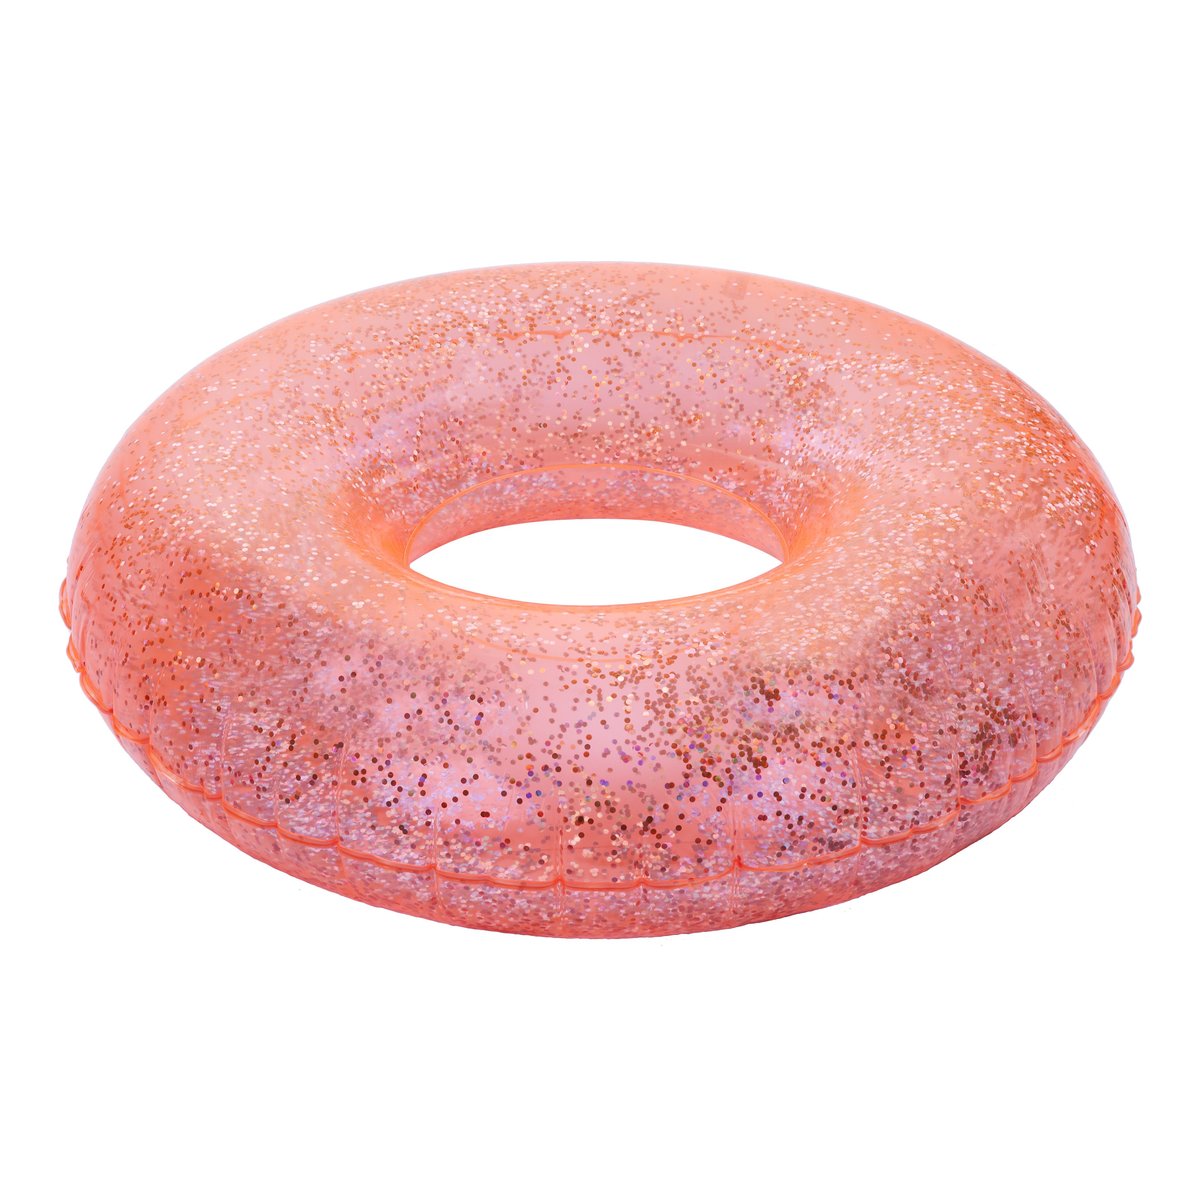 POOL RING - CORAL GLITTER